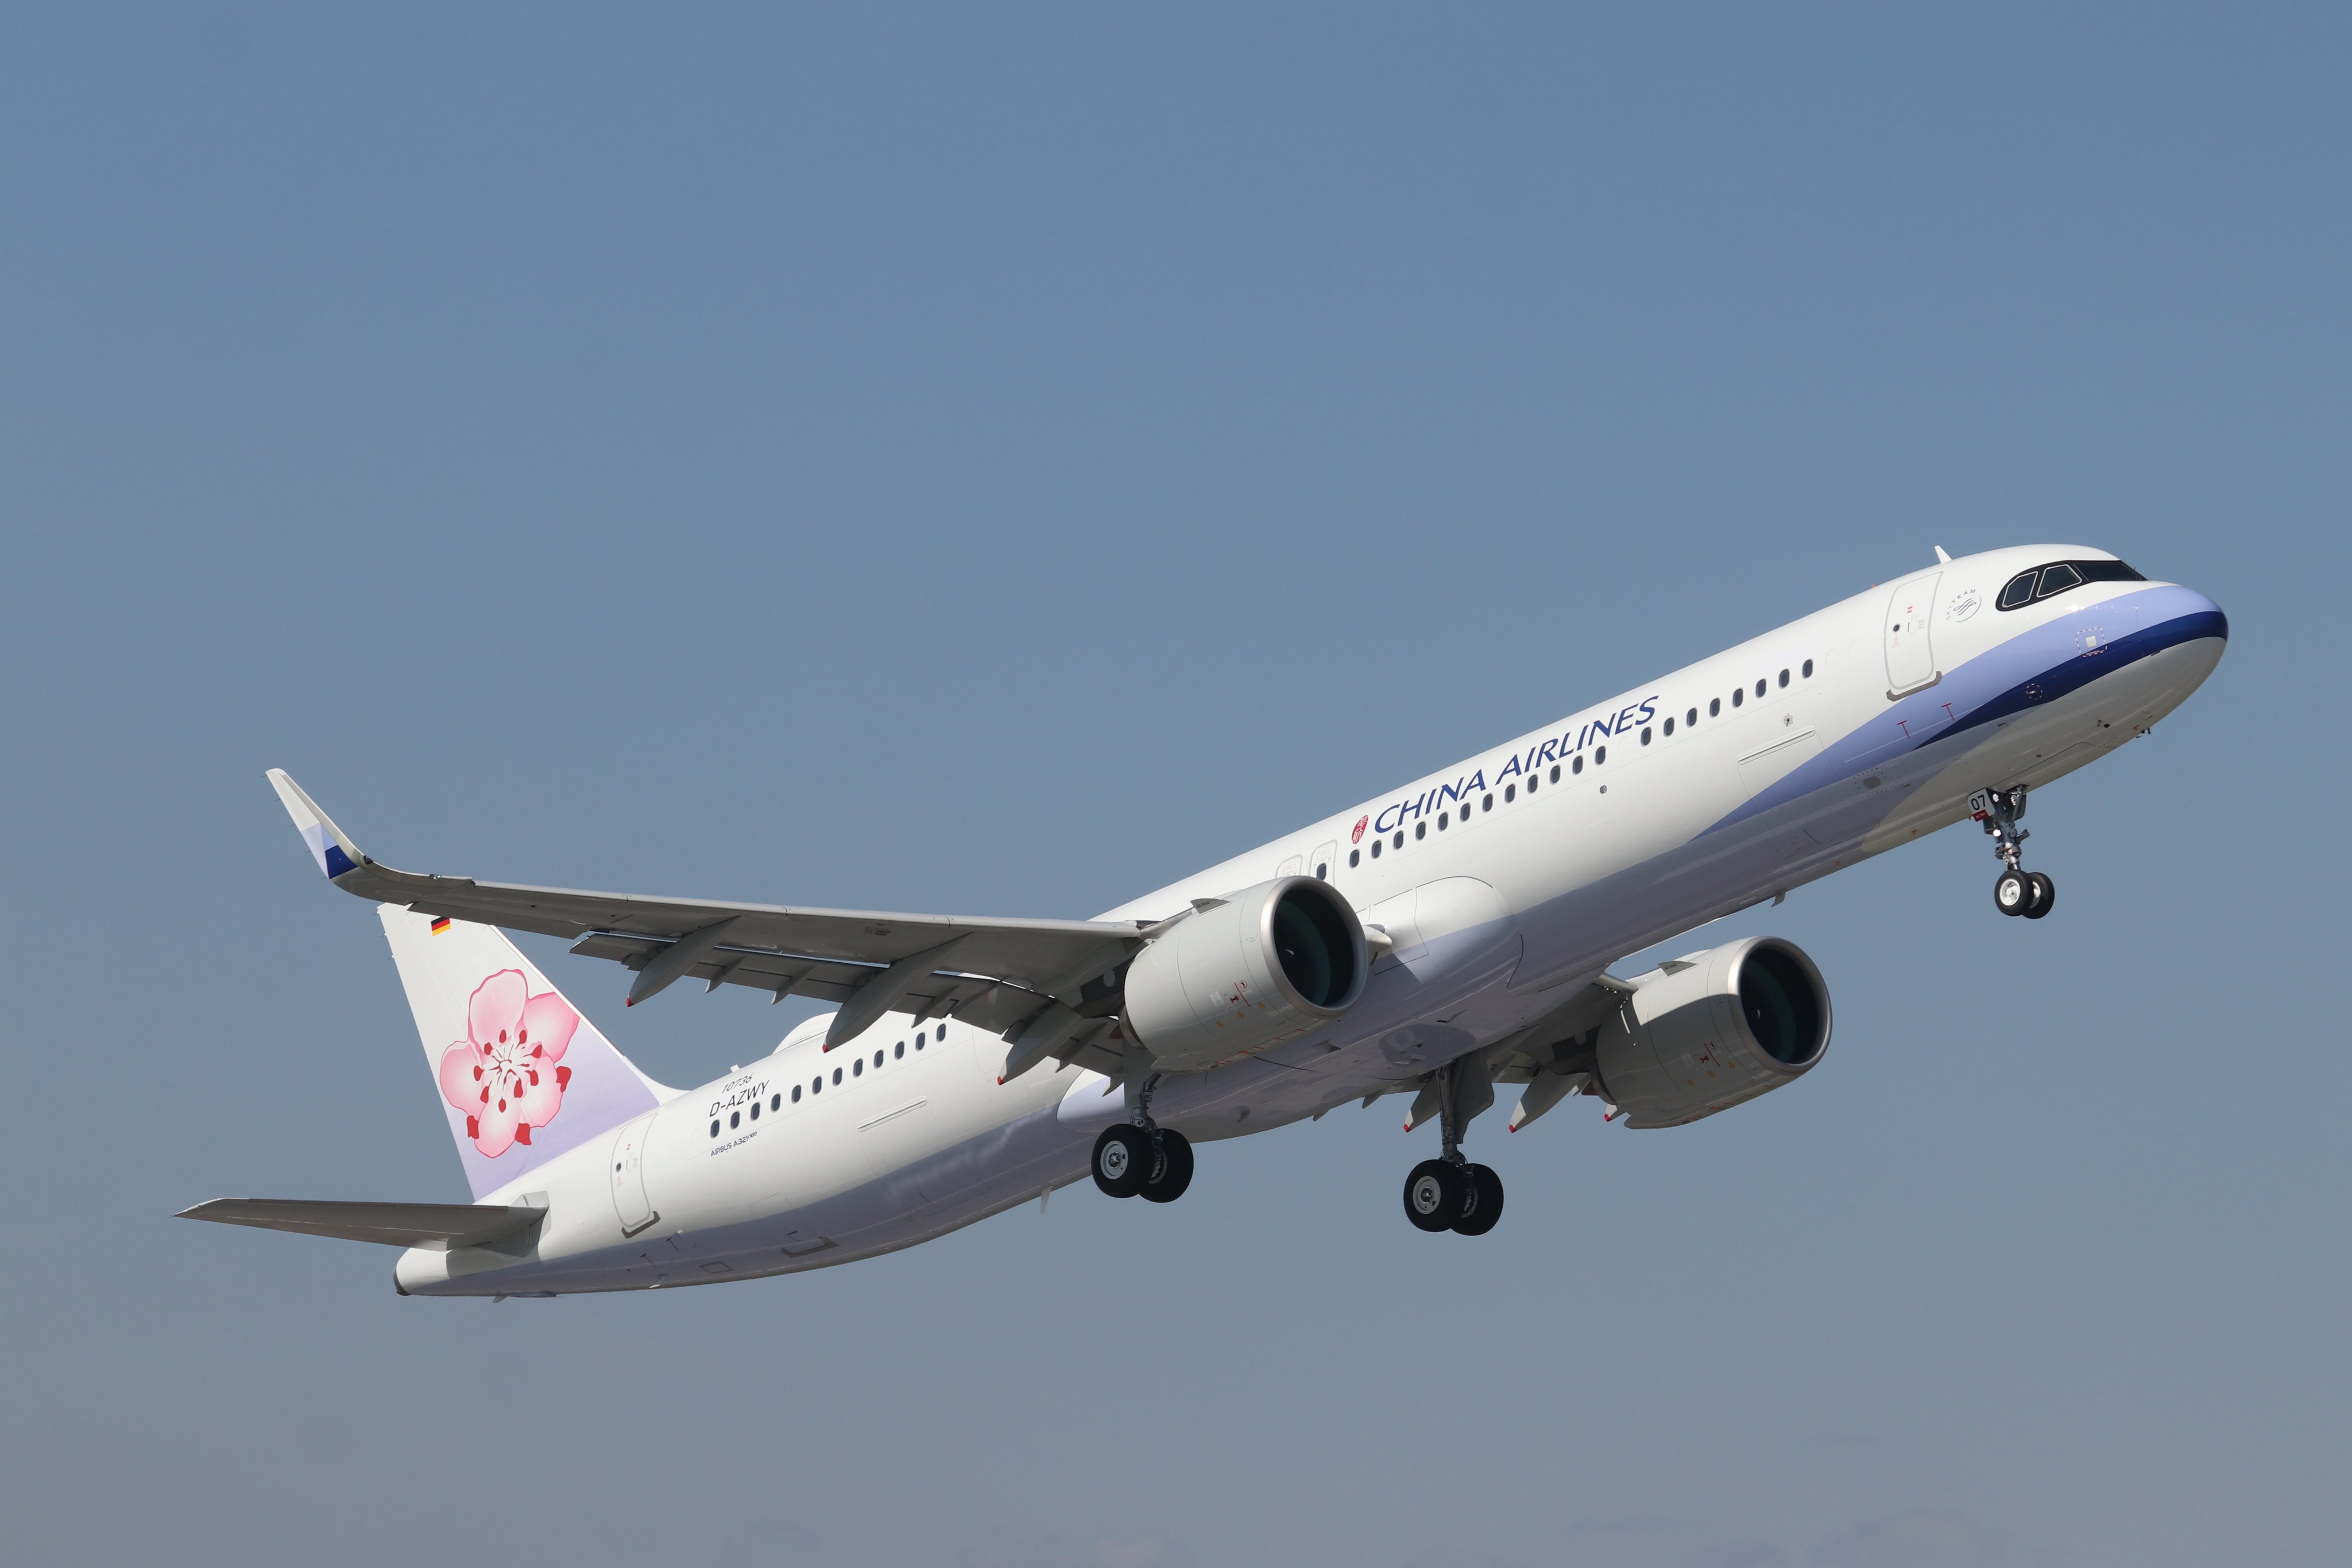 Tobi on Twitter: "#A321nx #China #Airlines B-18107 https://t.co/uOuag4EhD1" / Twitter